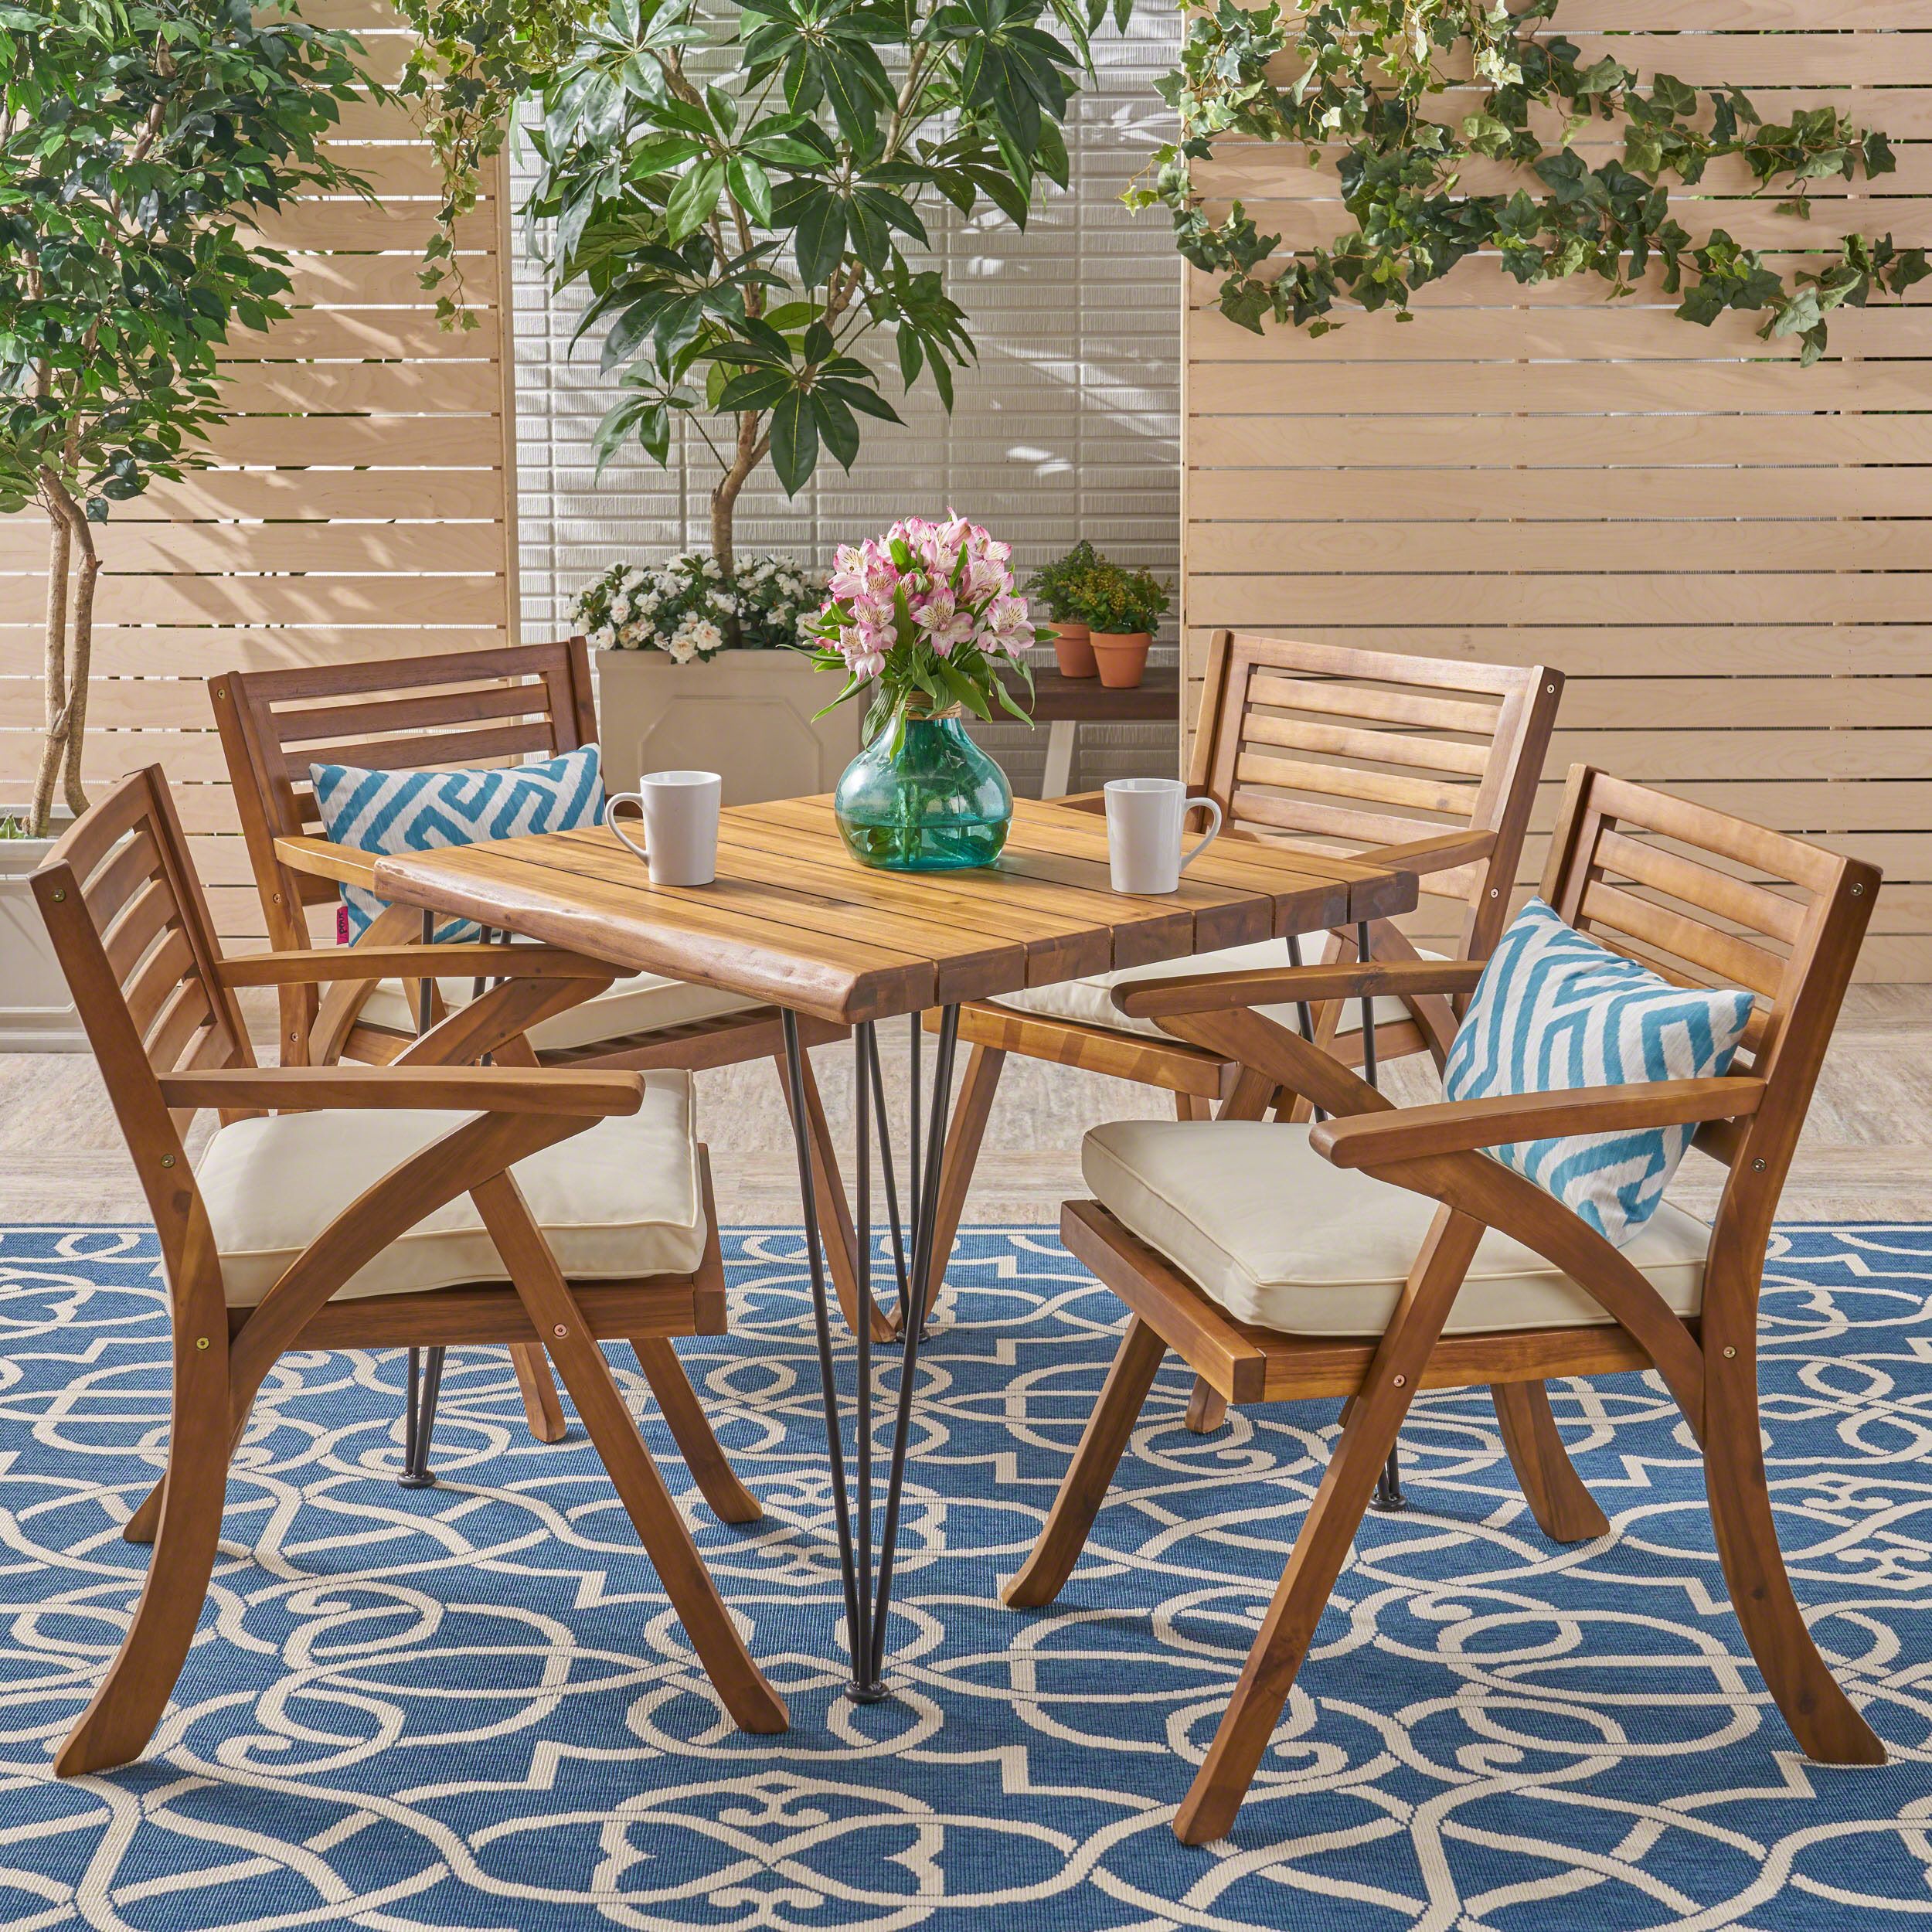 Lane Outdoor Industrial Wood And Wicker 5 Piece Square Dining Set, Teak Throughout Teak Wicker Outdoor Dining Sets (View 10 of 15)